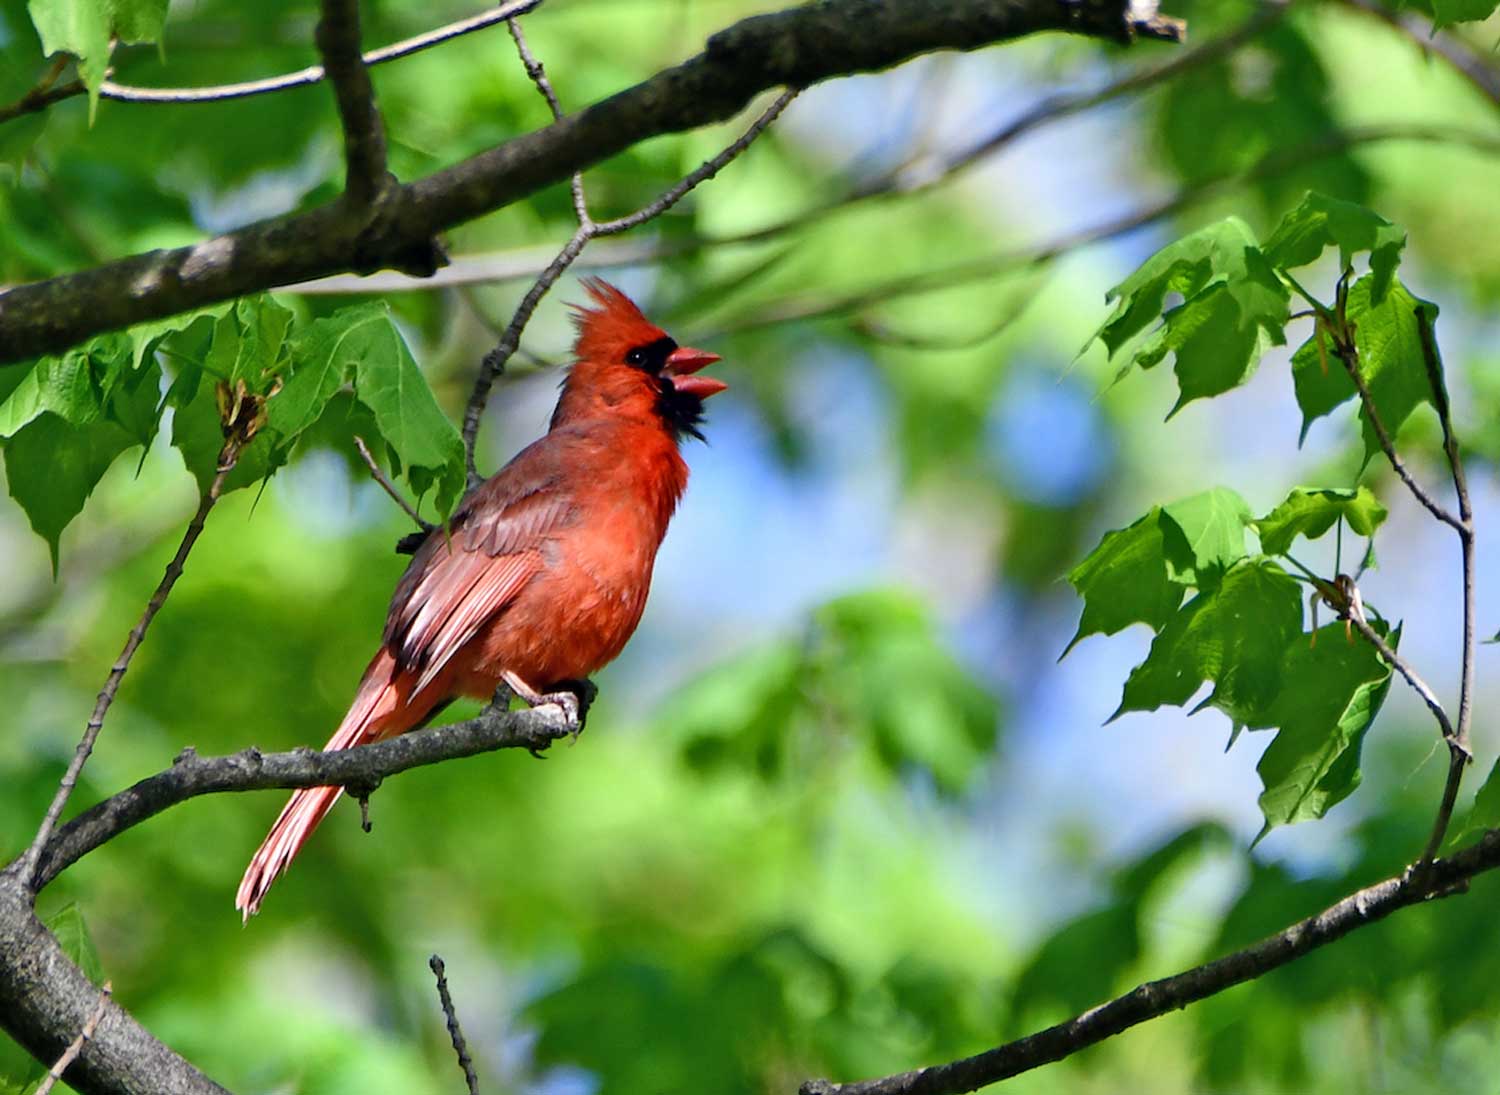 A male cardinal singing while perched on a branch.